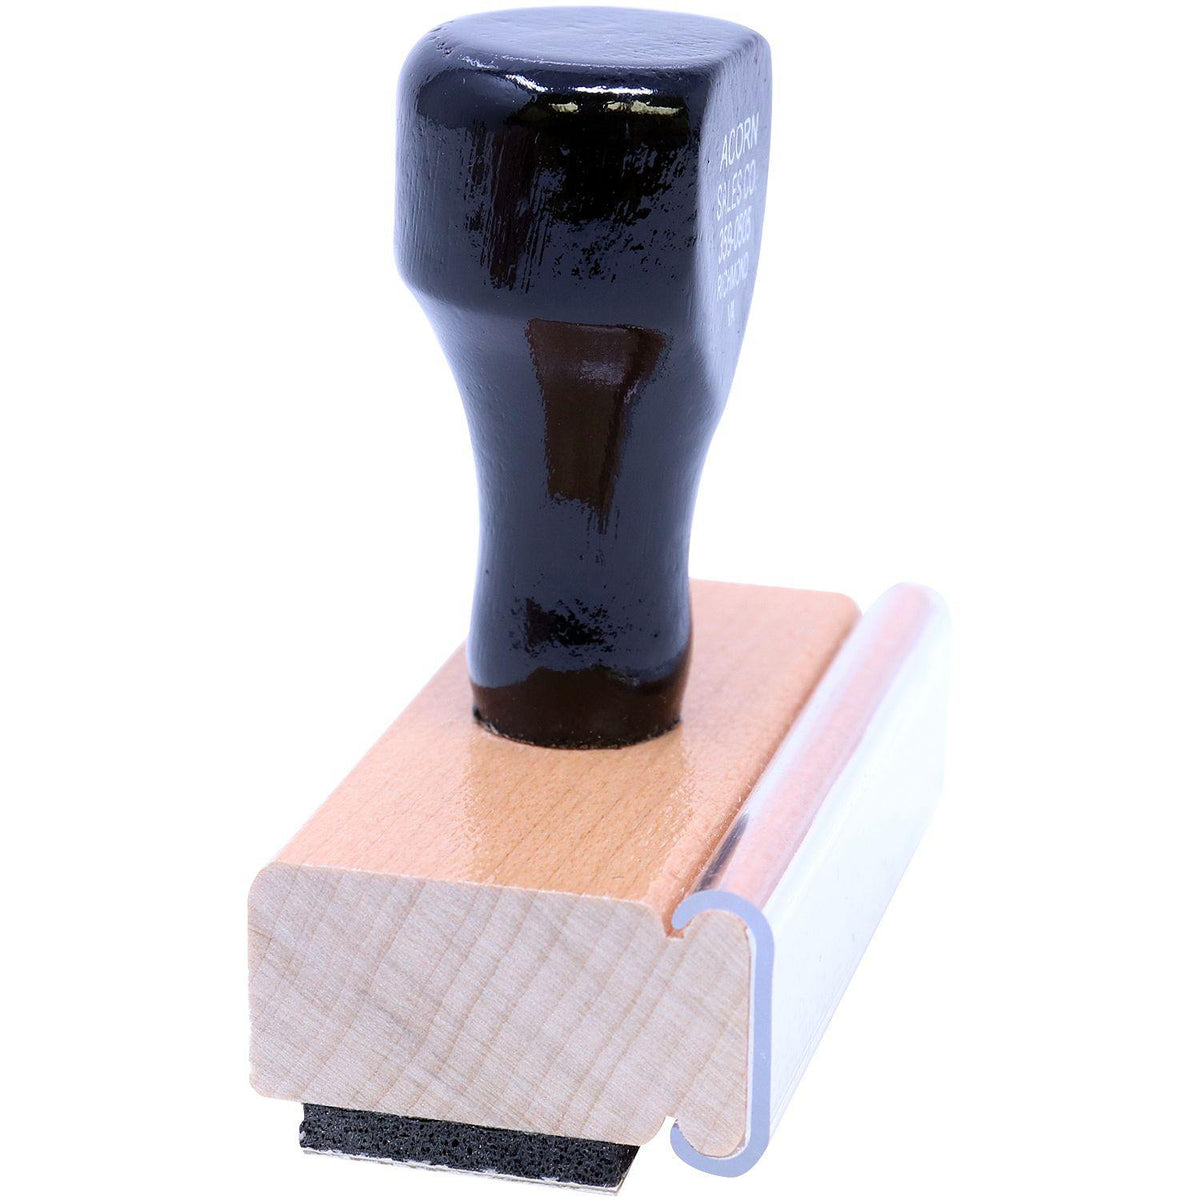 Side View of Large Advance Directive Rubber Stamp at an Angle